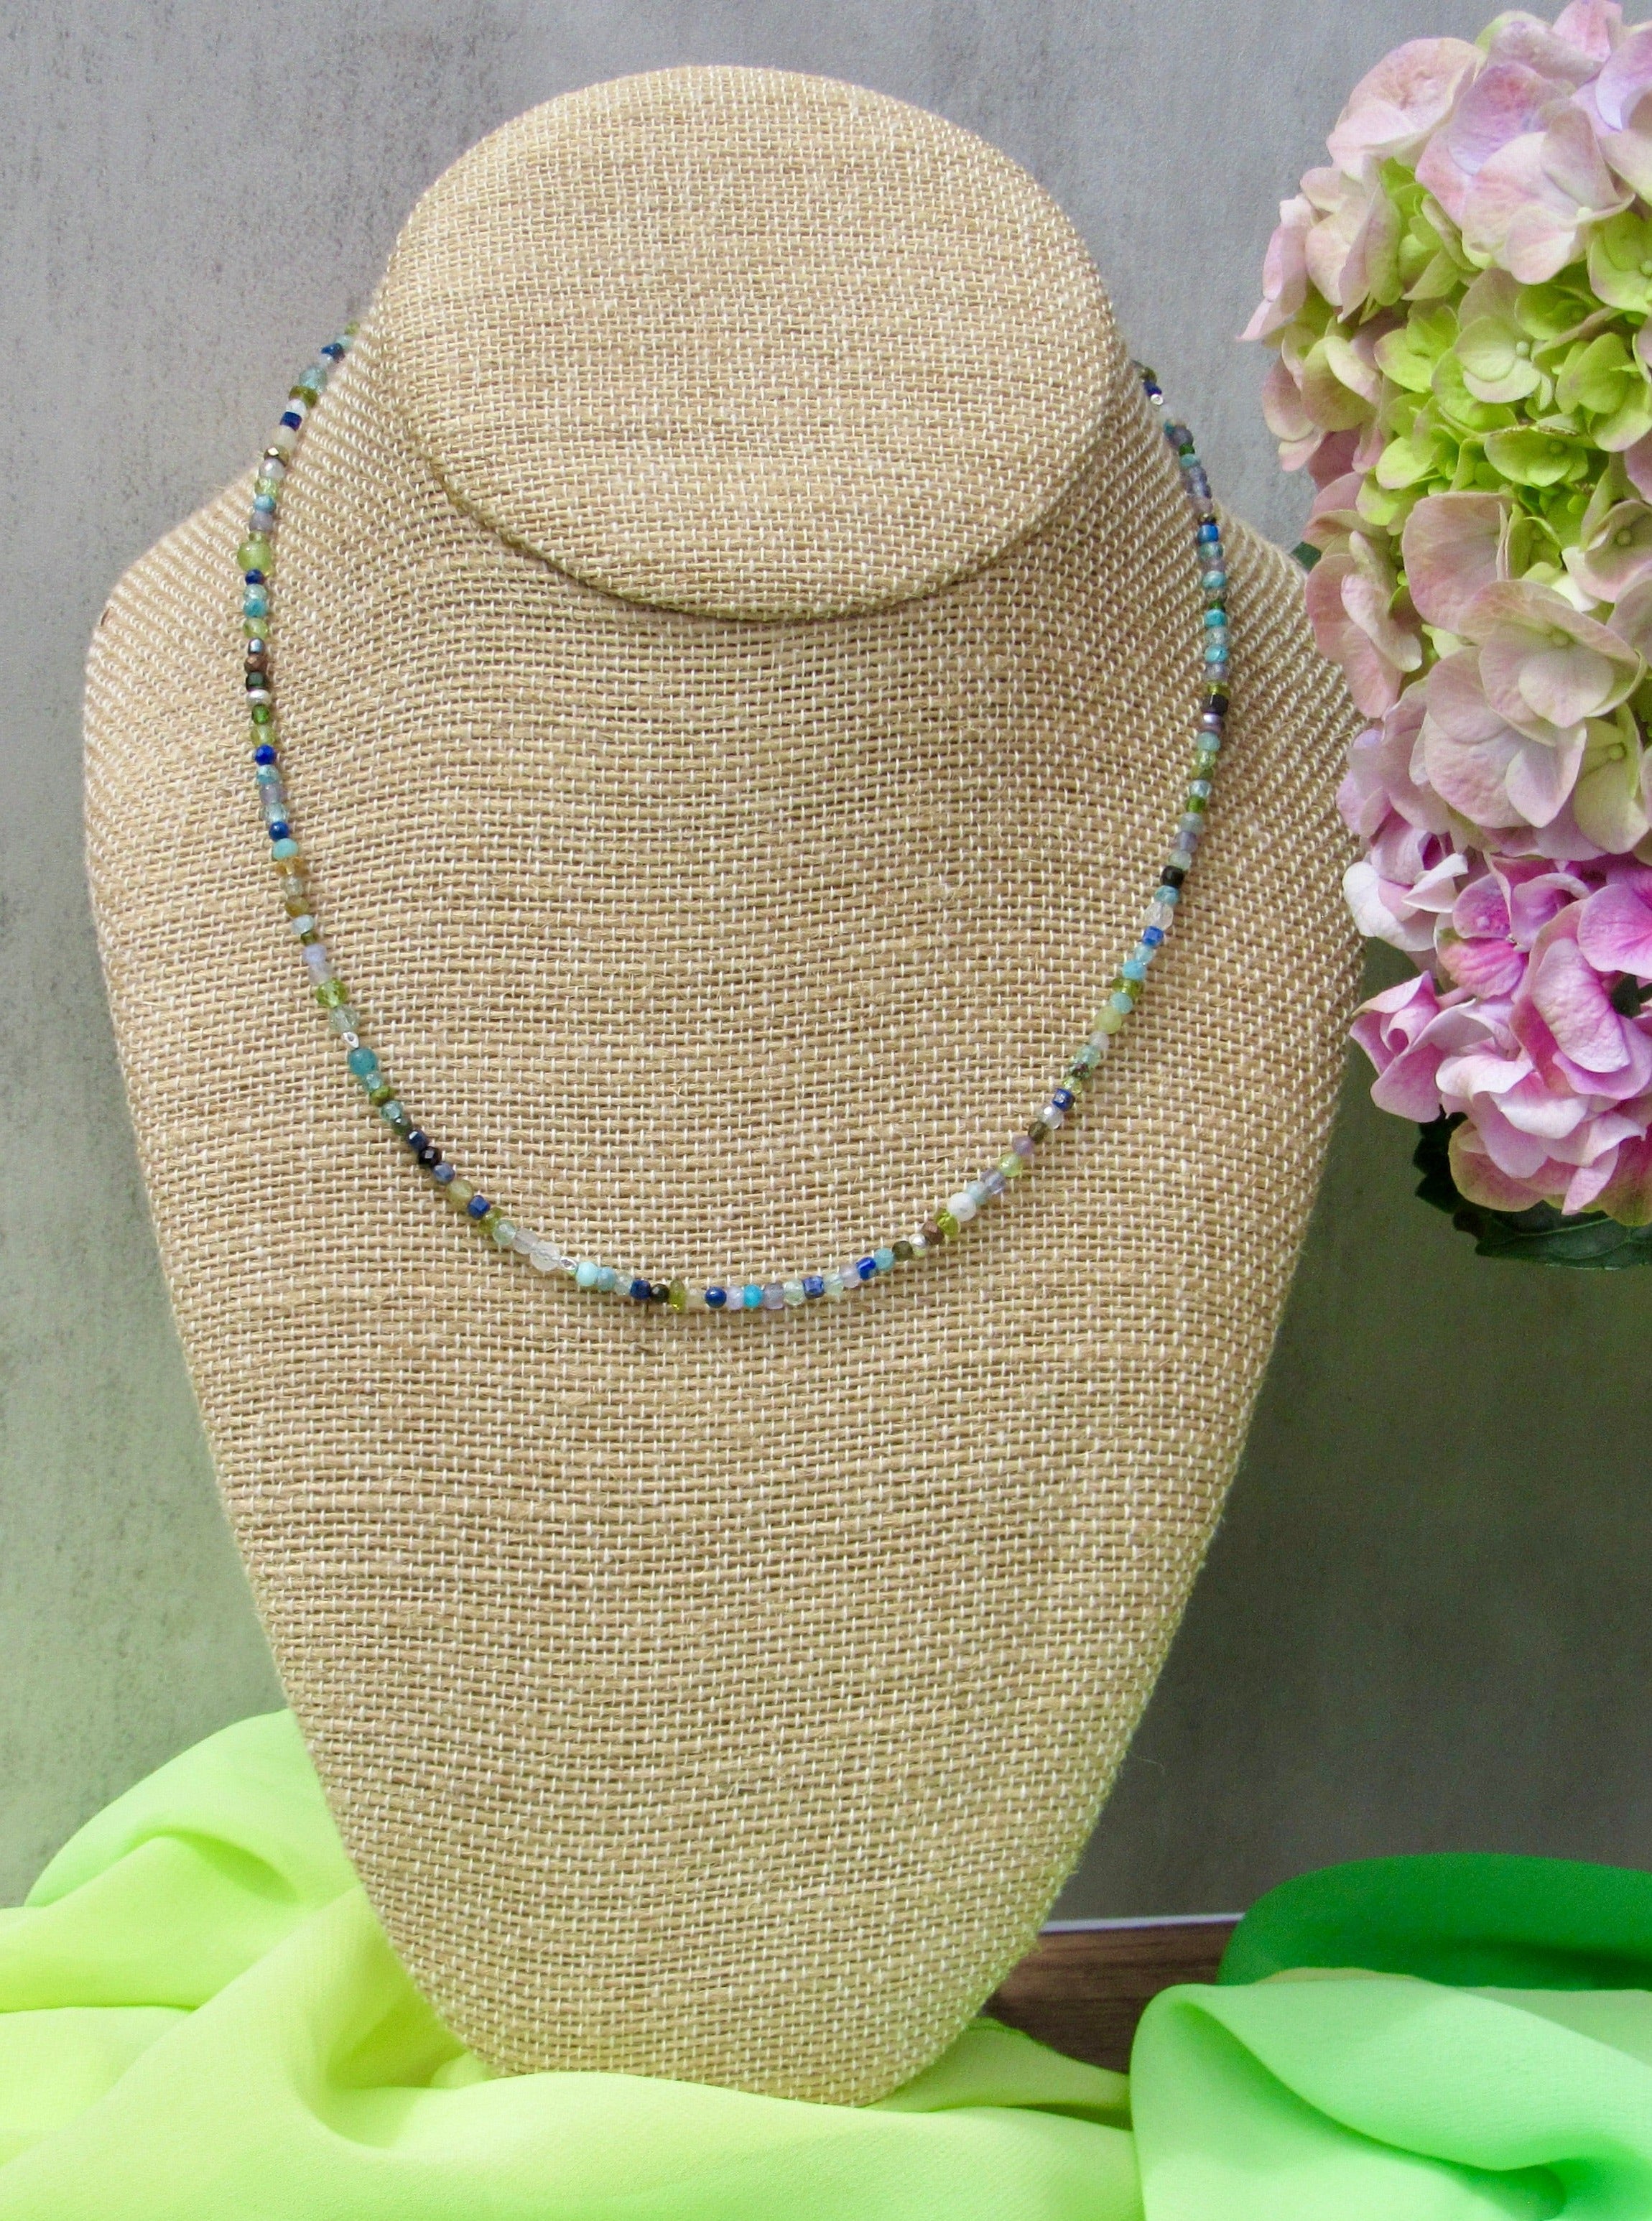 Delicate Mixed Gem Necklace